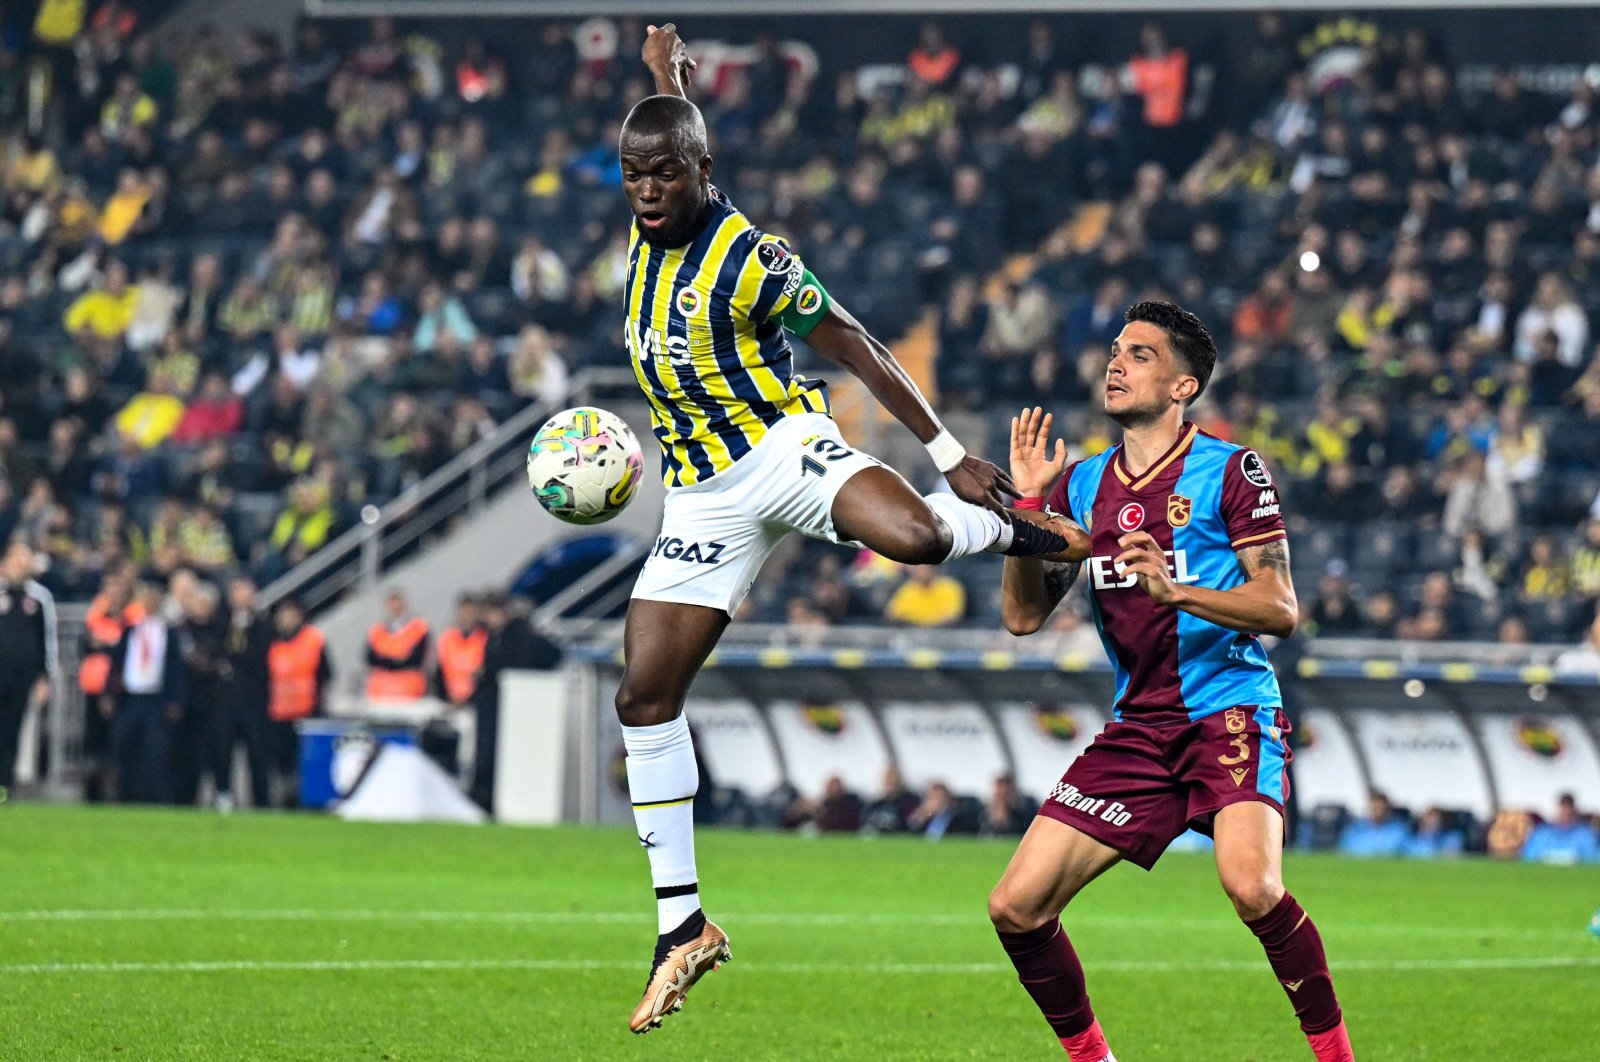 Fenerbahçe&#039;s Enner Valencia (L) in action with Trabzonspor&#039;s Marc Bartra during Süper Lig match at the Ülker Stadium, Istanbul, Türkiye, May 18, 2023. (AA Photo)